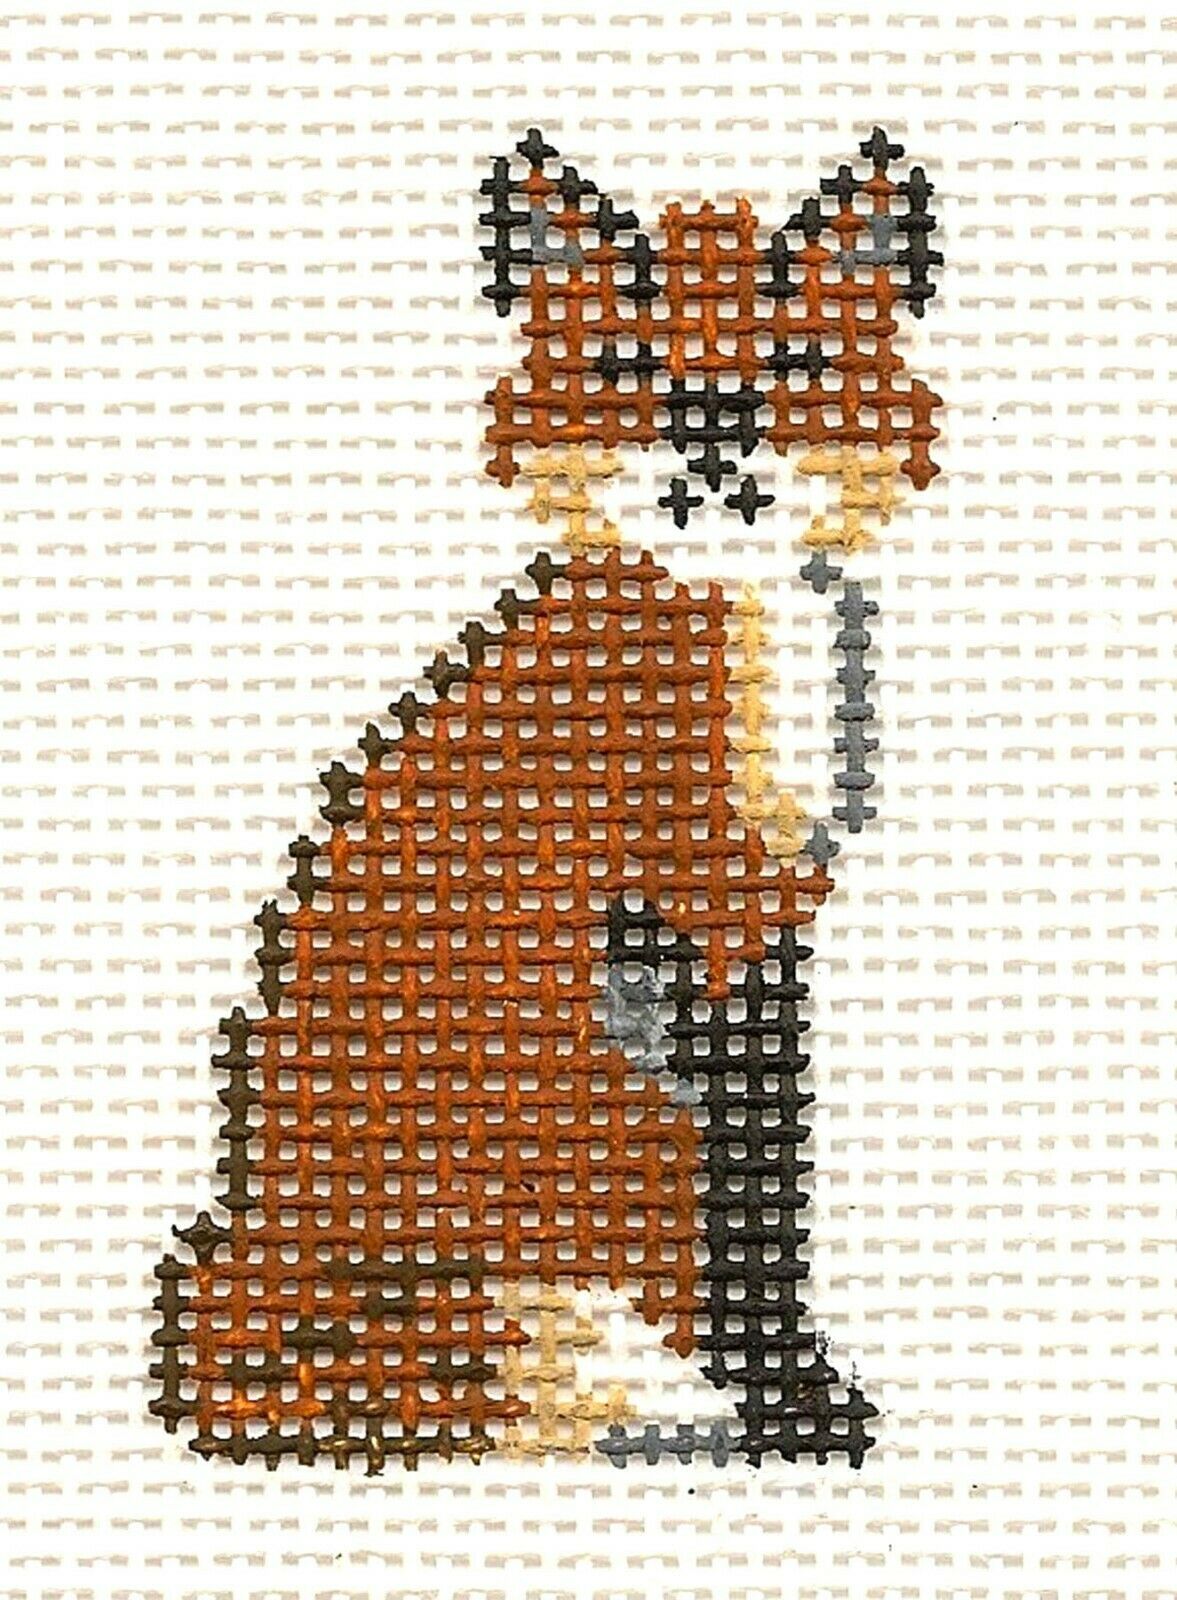 Fox ~ Little RED FOX handpainted Needlepoint Canvas & STITCH GUIDE by Painted Pony